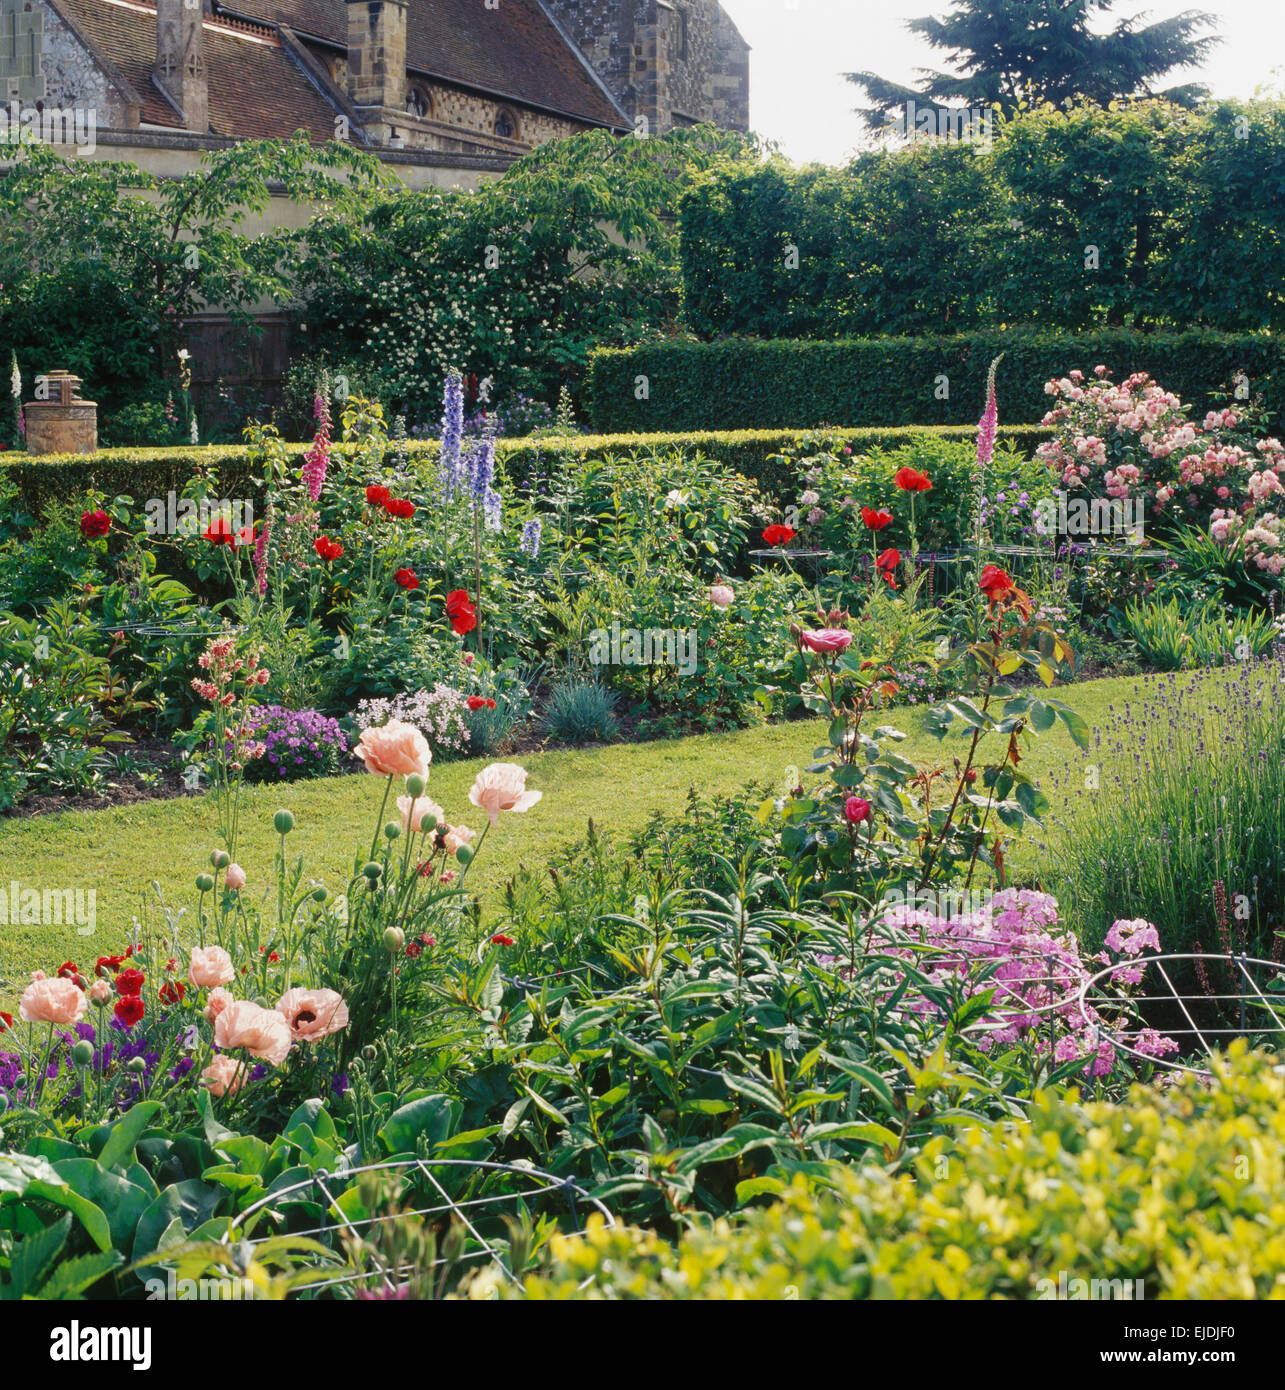 Pink opium poppies and pink phlox in a border beside grass path in large country garden with clipped hedges Stock Photo